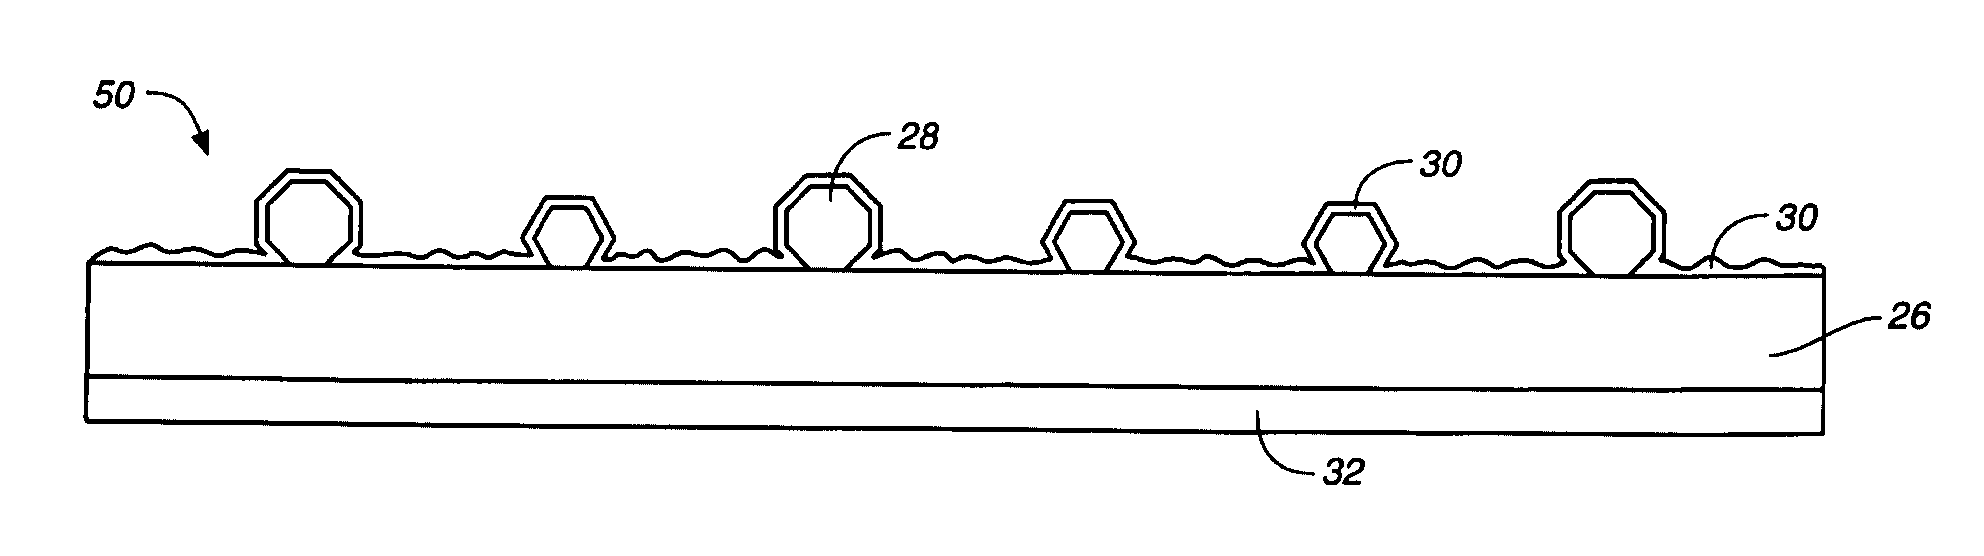 CVD diamond-coated composite substrate containing a carbide-forming material and ceramic phases and method for making same